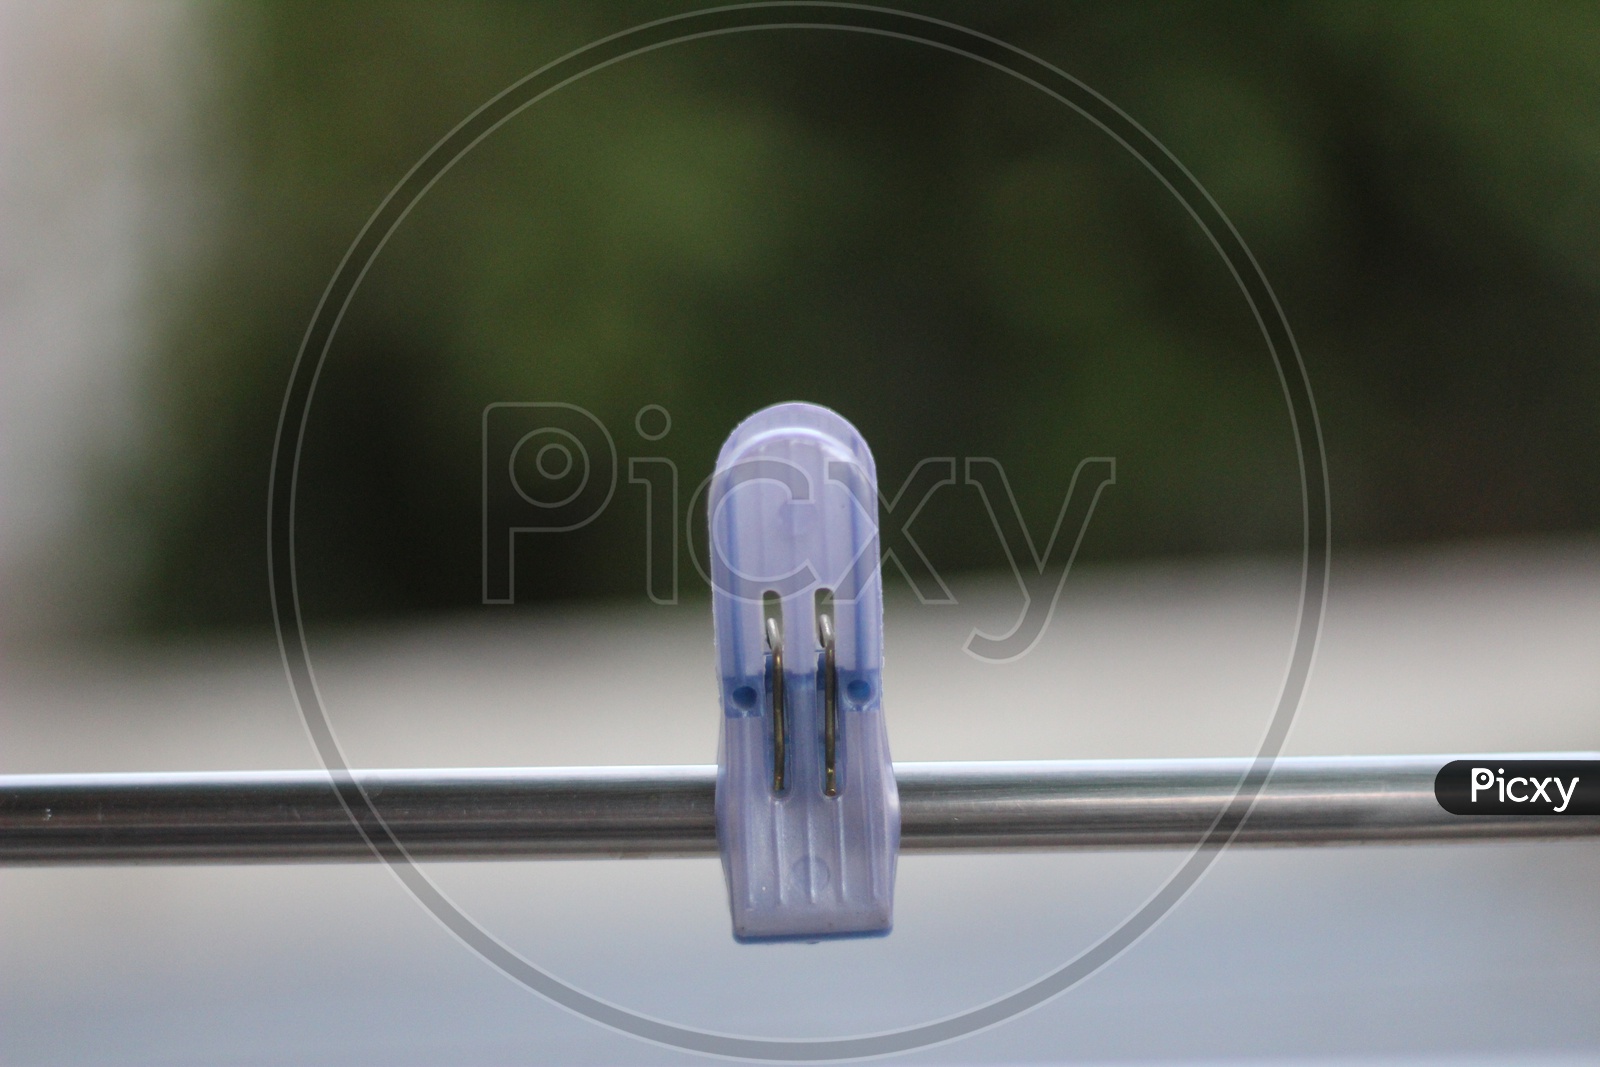 Clothes Dryer Clips With Selective Focus